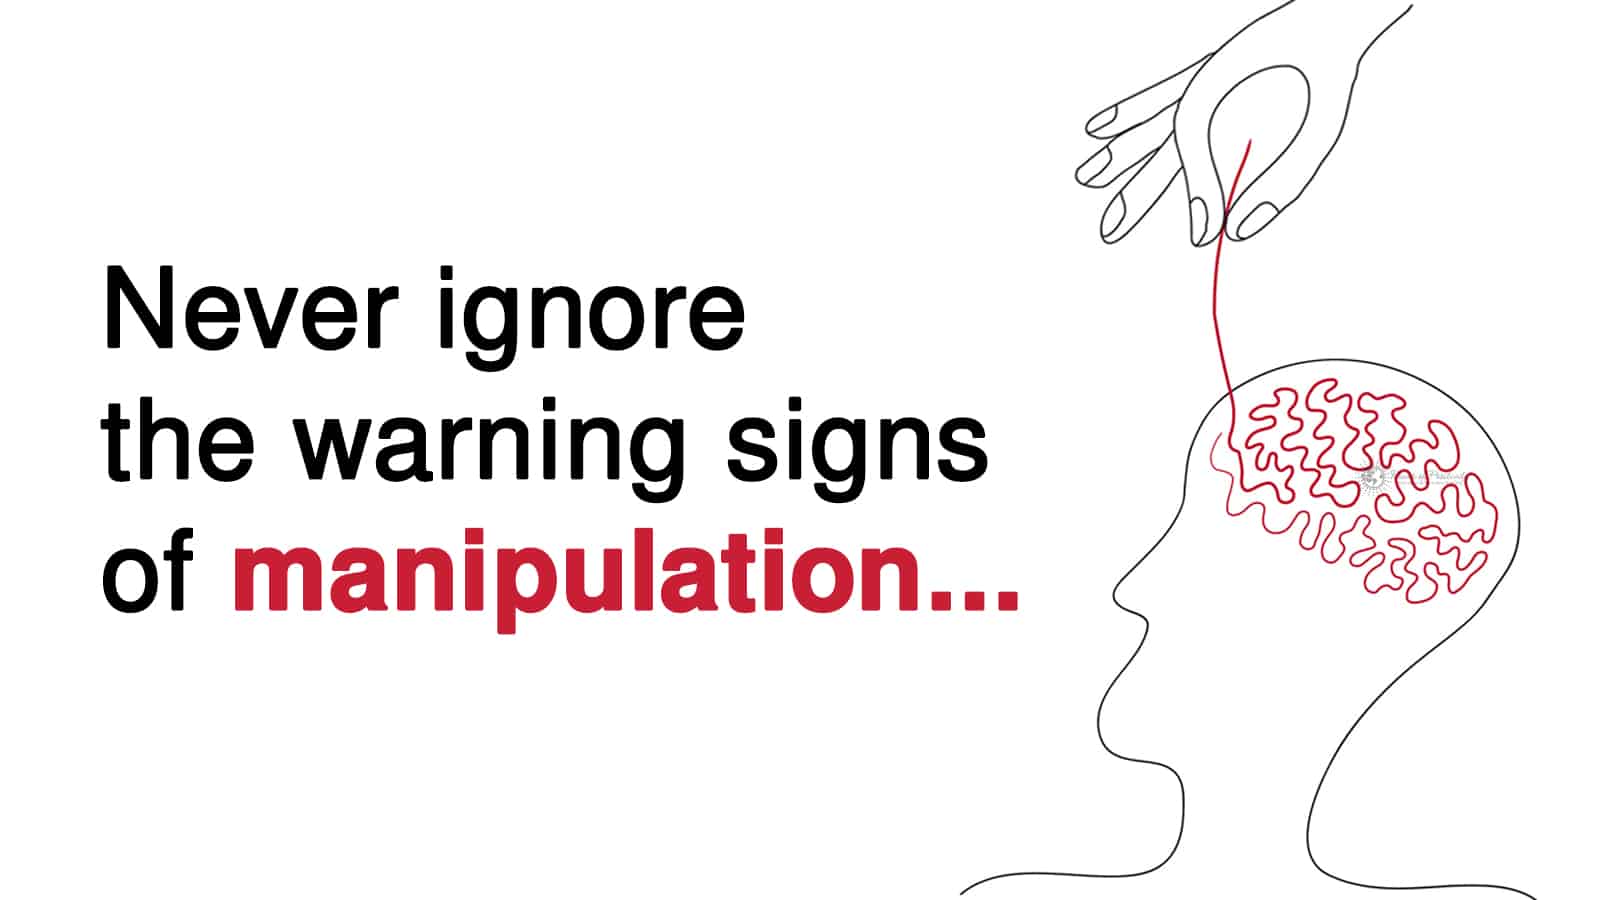 What Are Manipulation Signs?